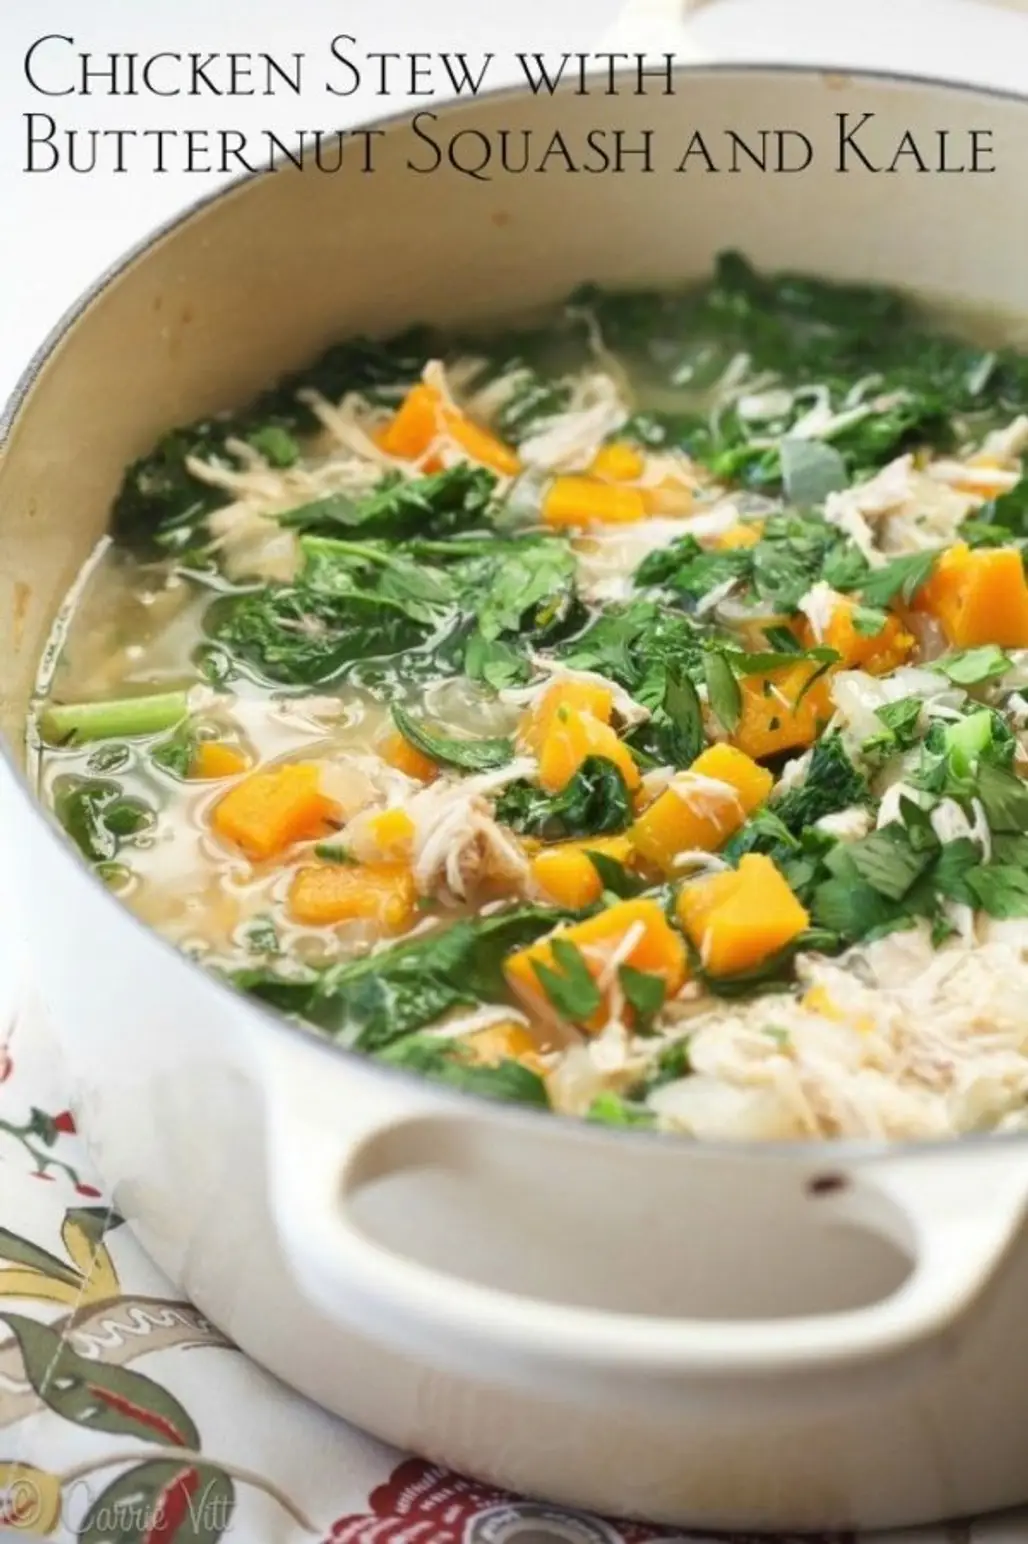 Chicken Stew with Butternut Squash and Kale